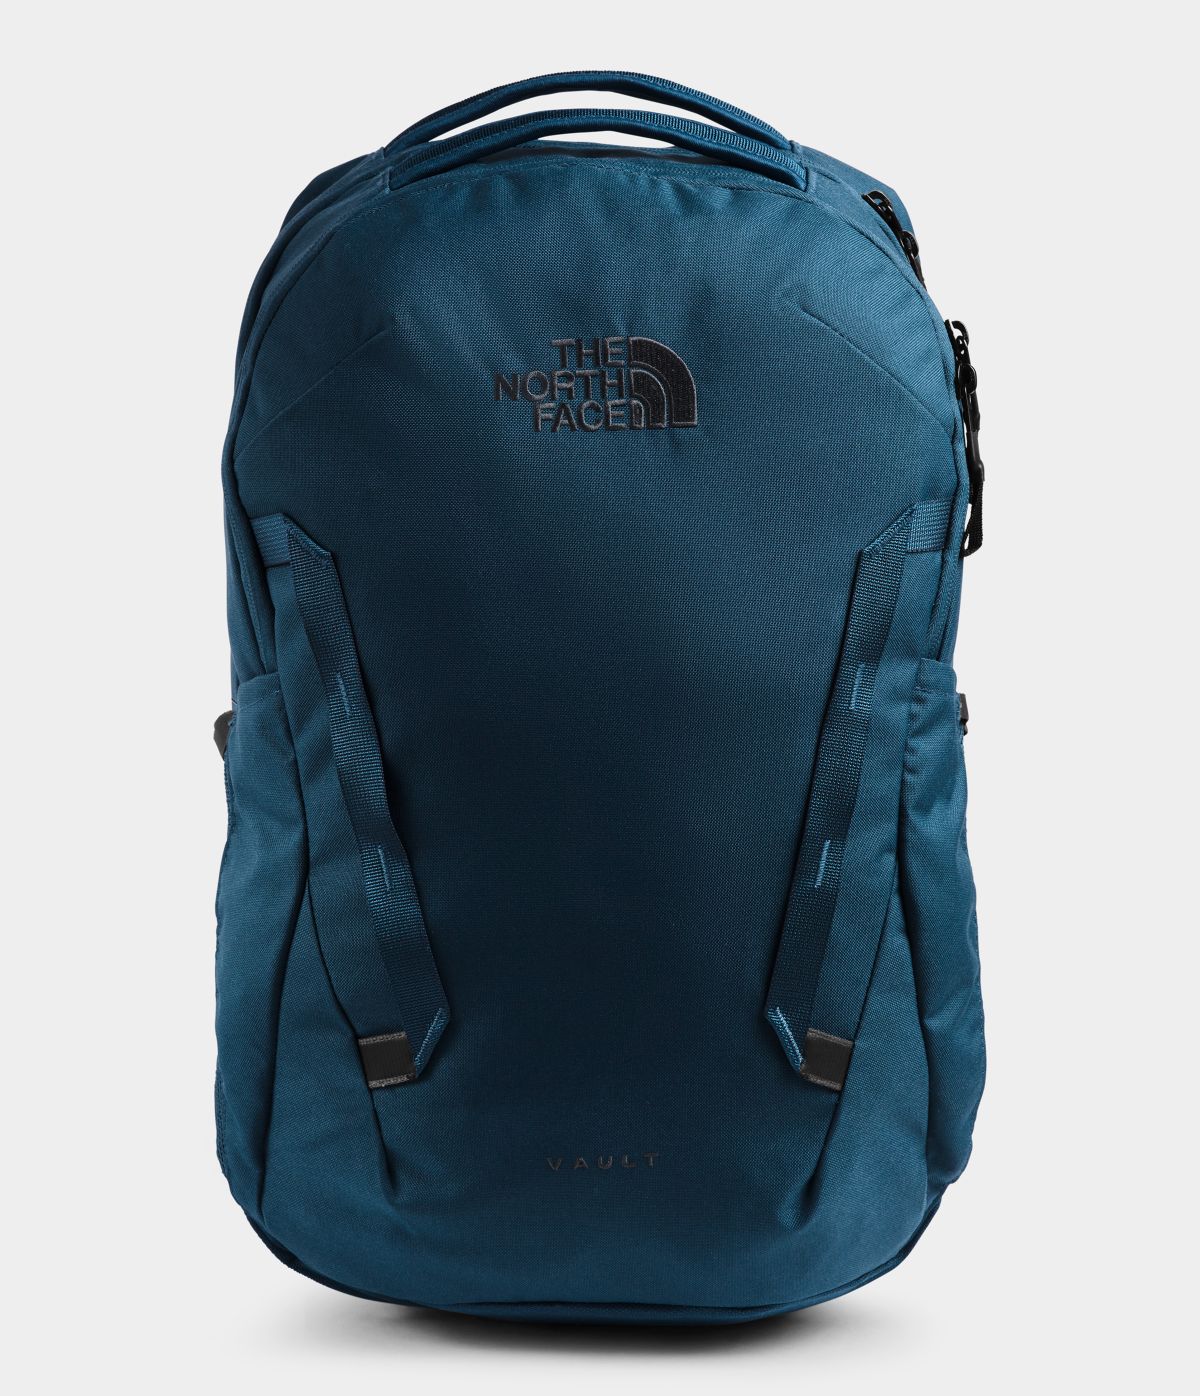 Unisex The North Face Vault Backpack in Blue Wing Teal from front view